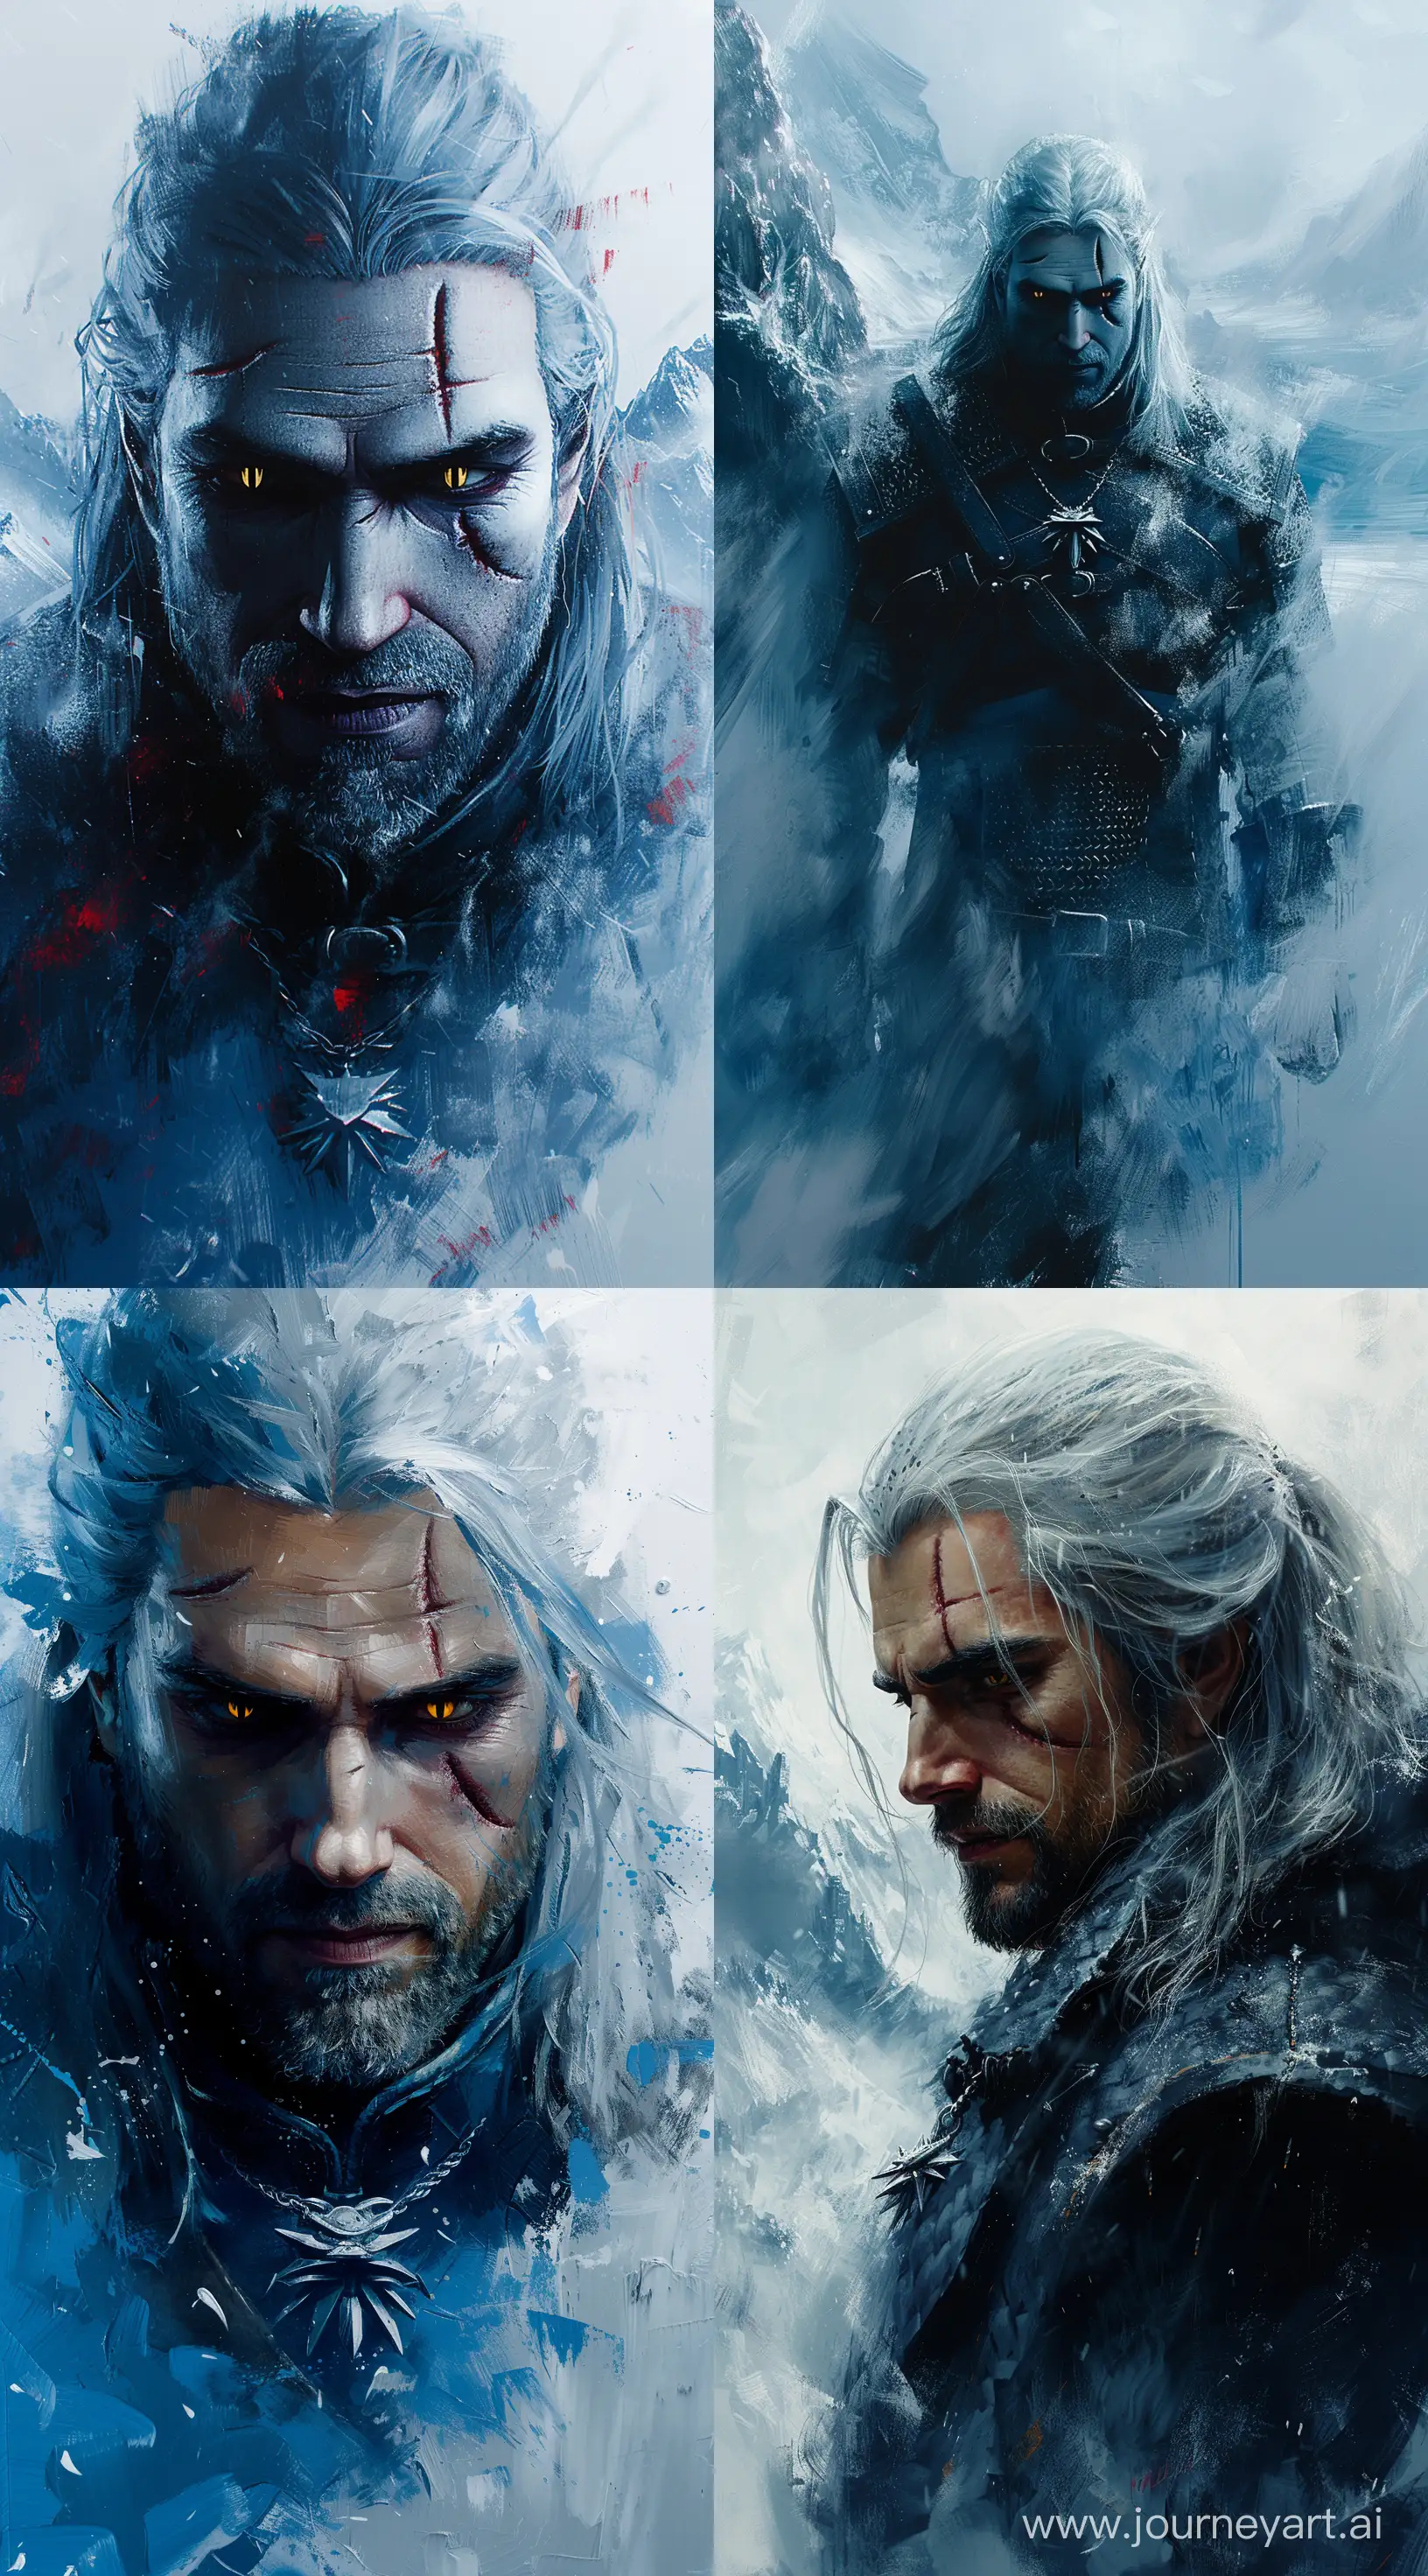 Expressive-Witcher-Art-Mountainous-Snow-Scenes-in-Brushwork-Style